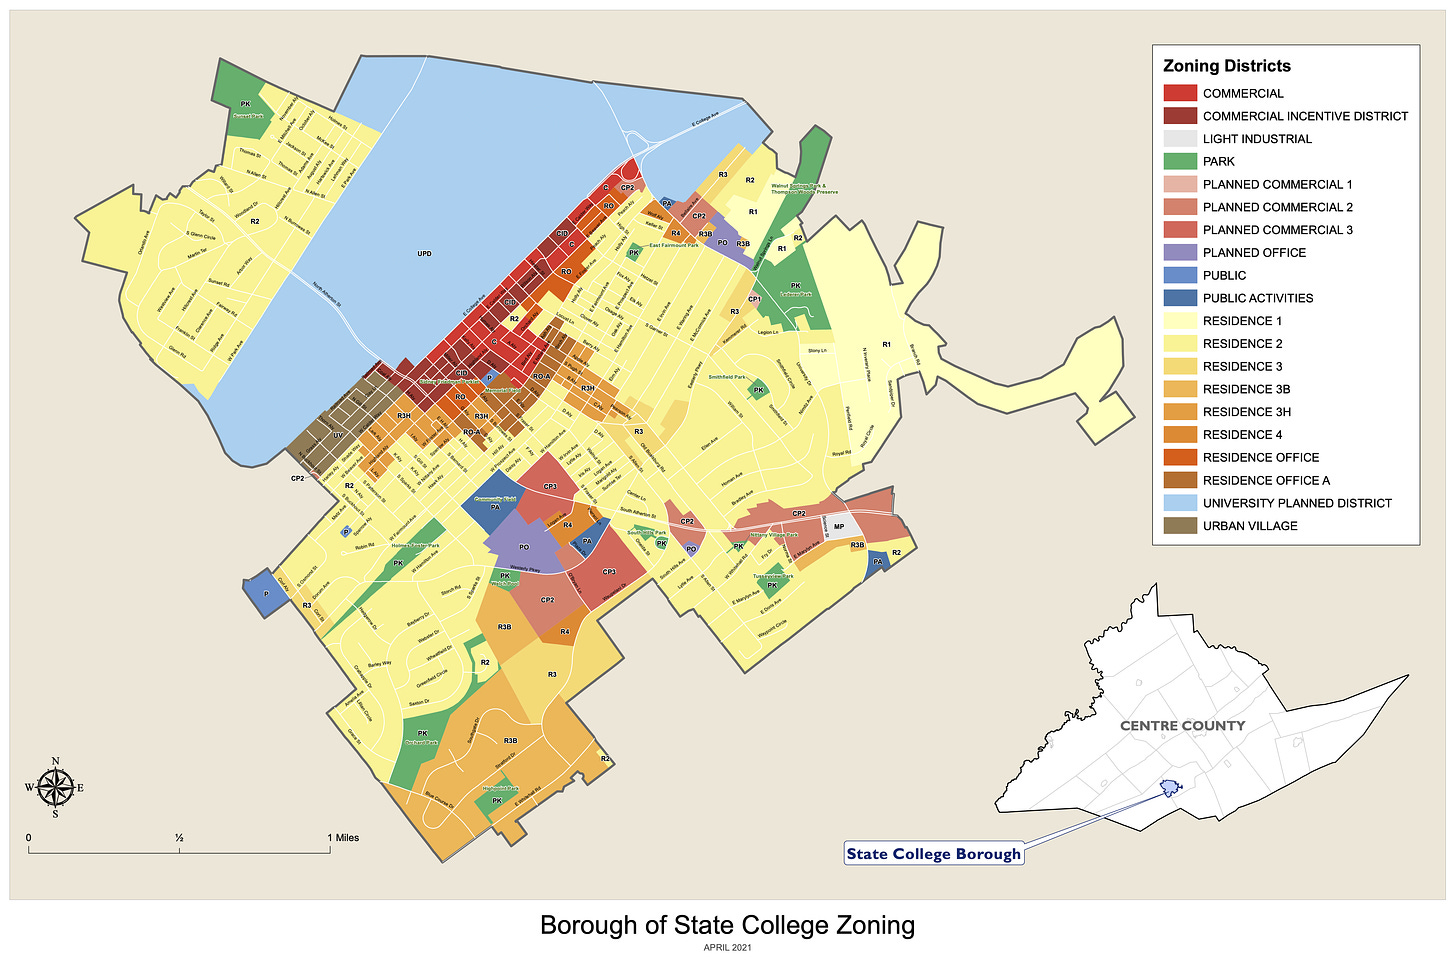 A zoning map of state college. Most of the area is a shade of yellow where apartment building is banned.